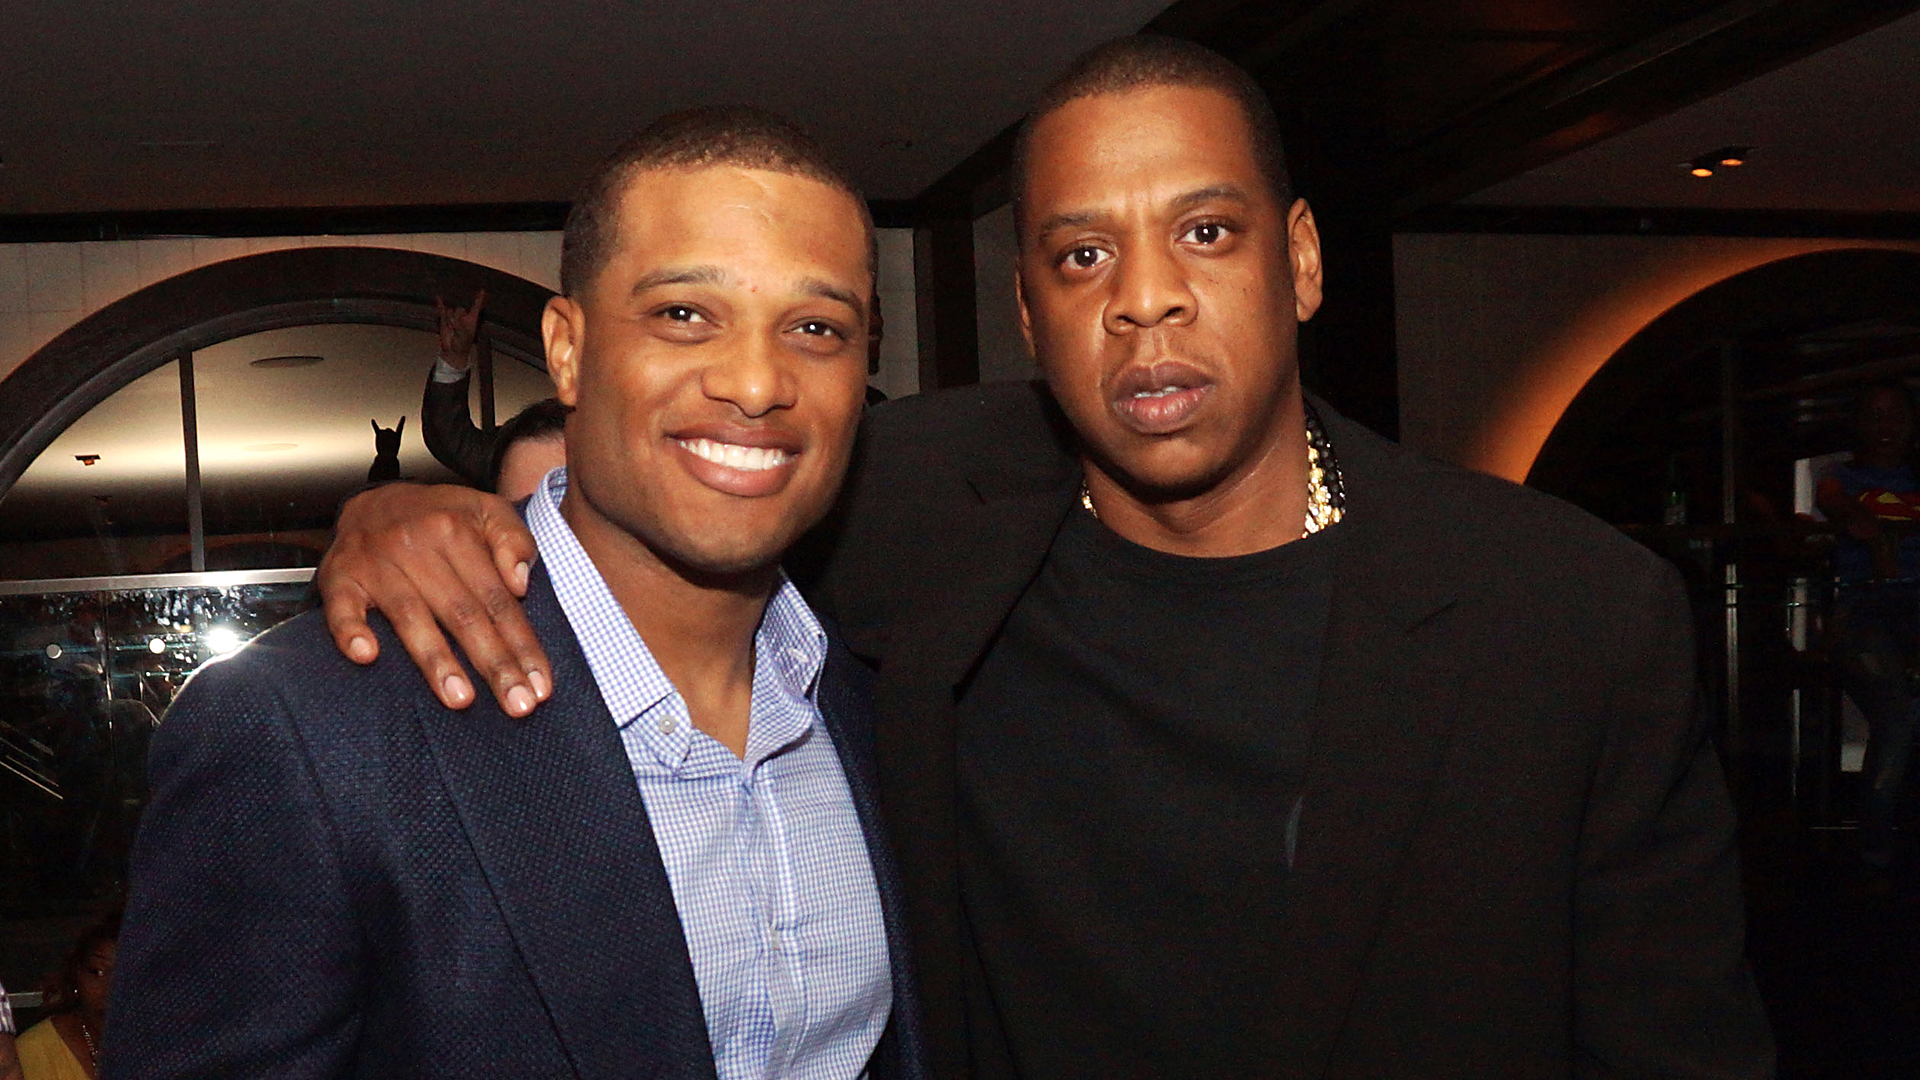 Mets have dinner with Jay Z, Robinson Cano reps